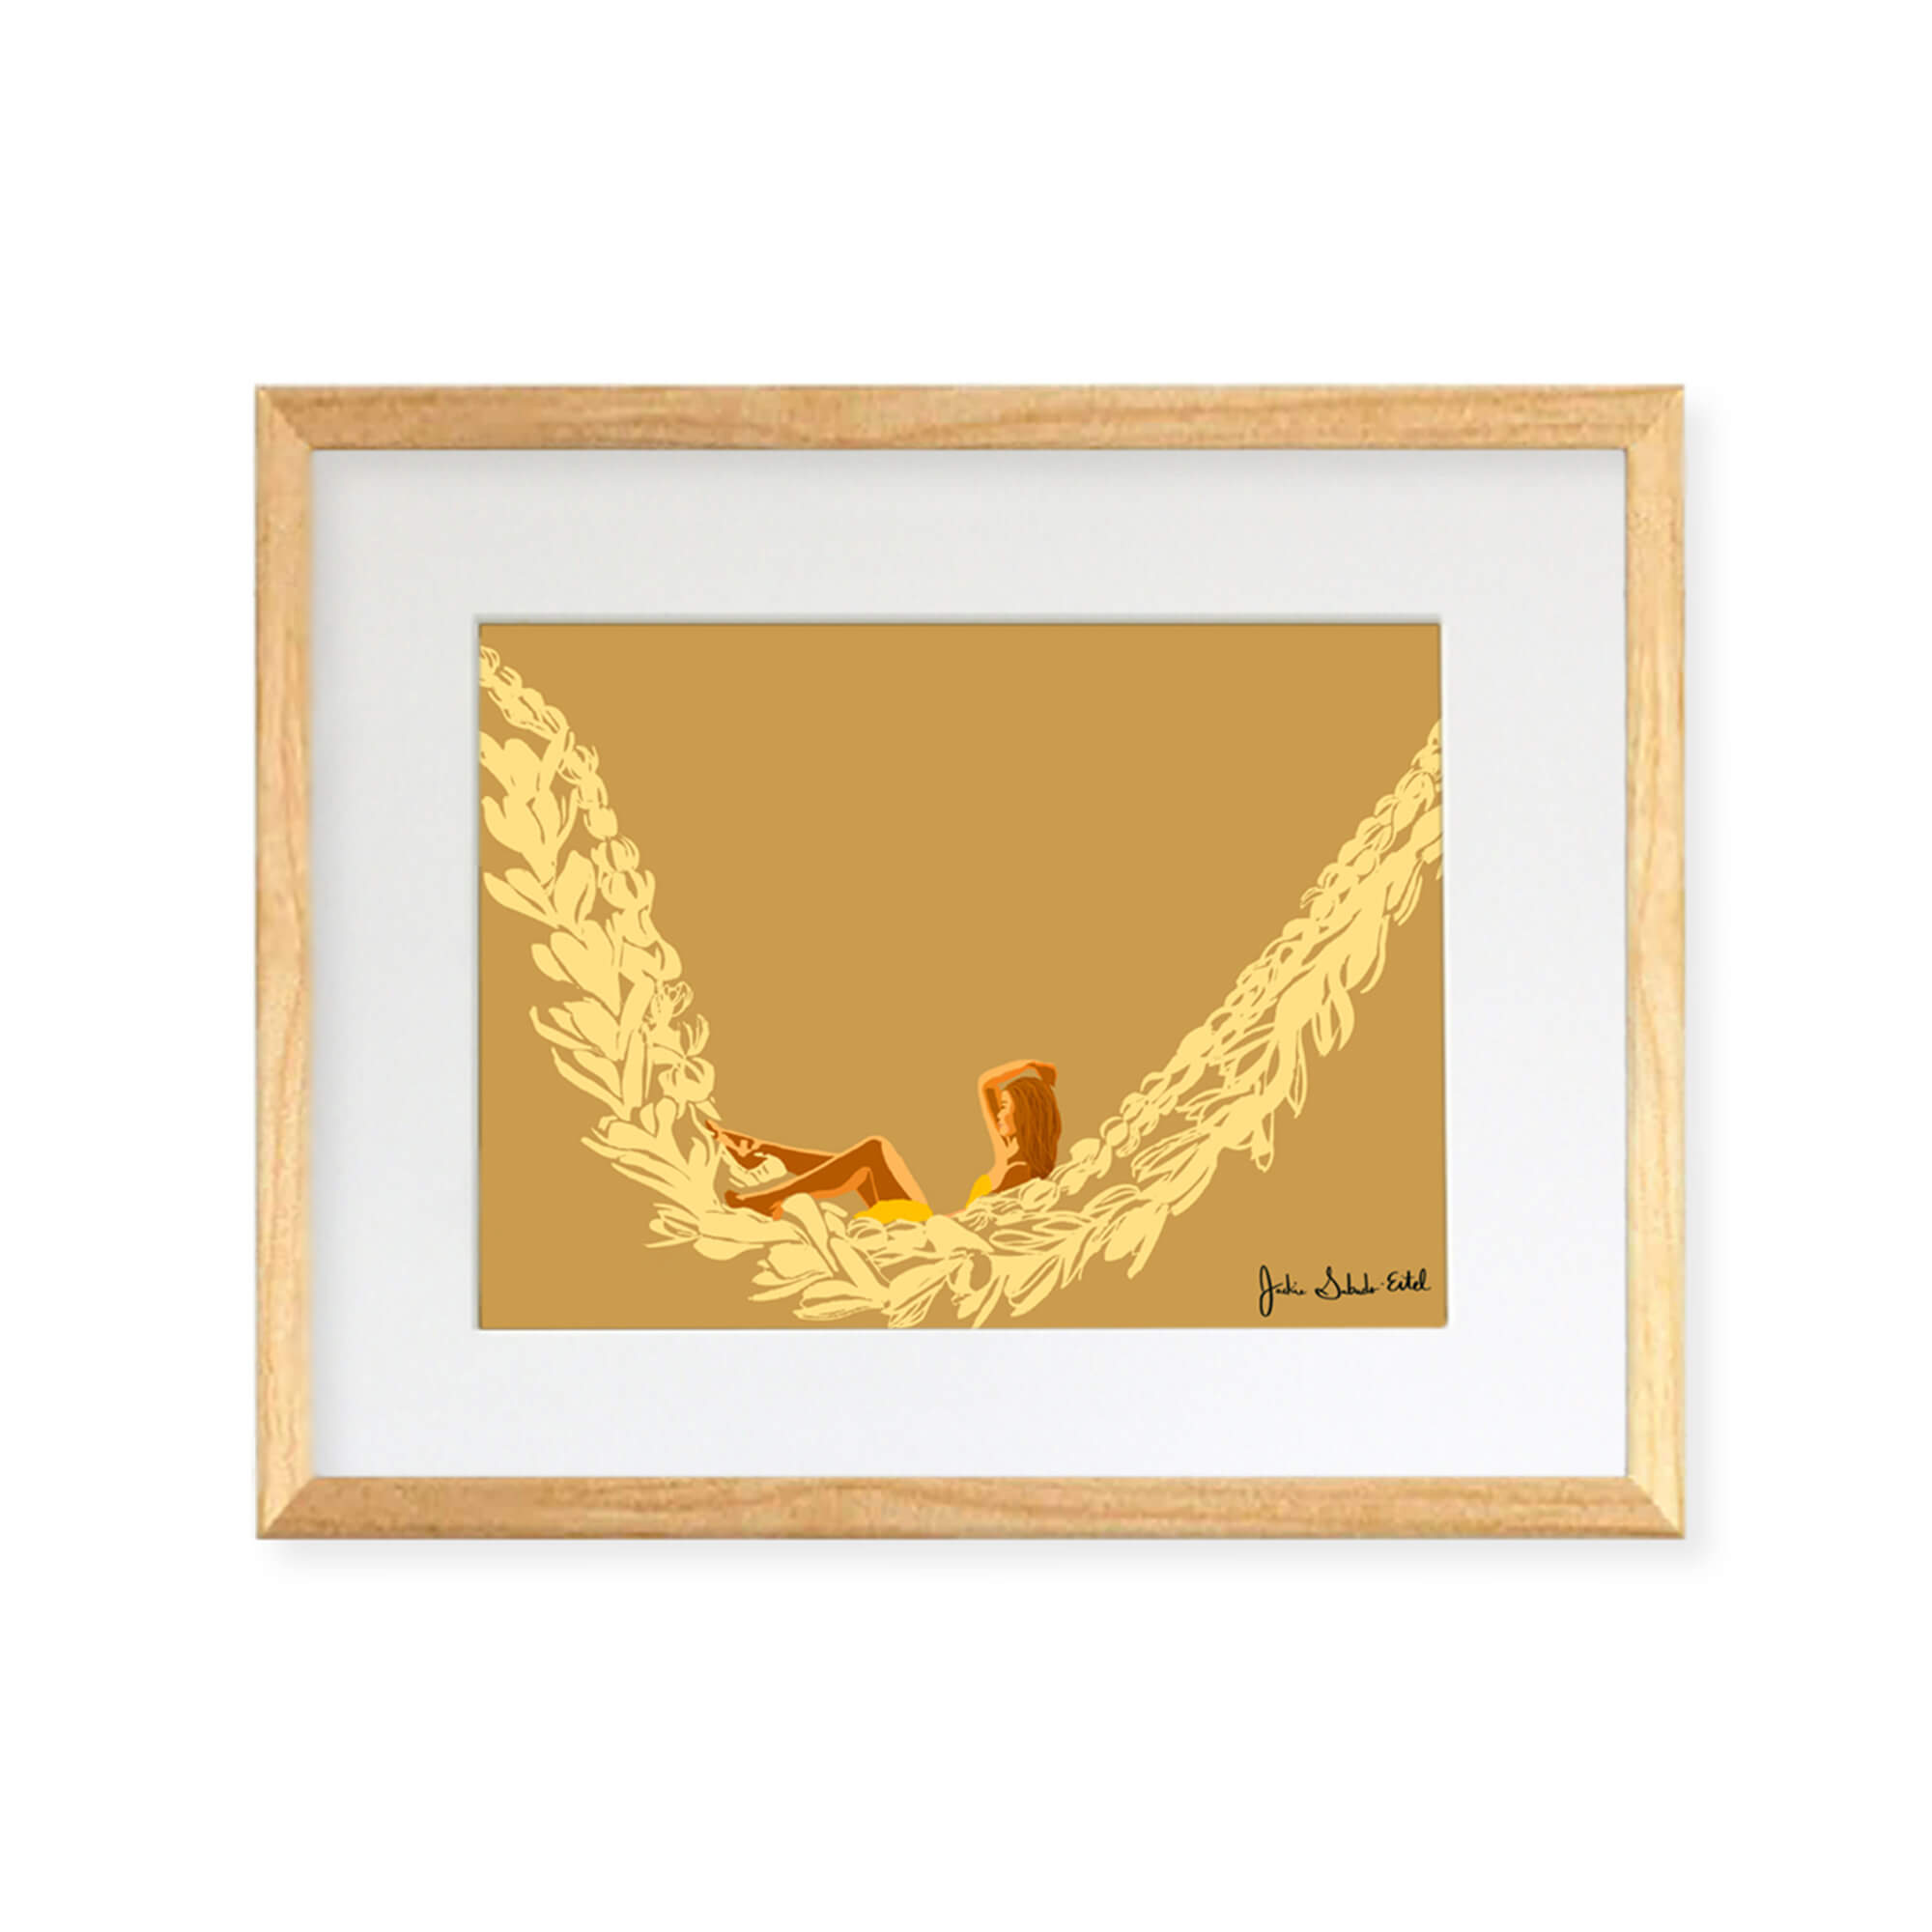 A framed matted art print featuring a woman relaxing on a lei hammock by Hawaii artist Jackie Eitel